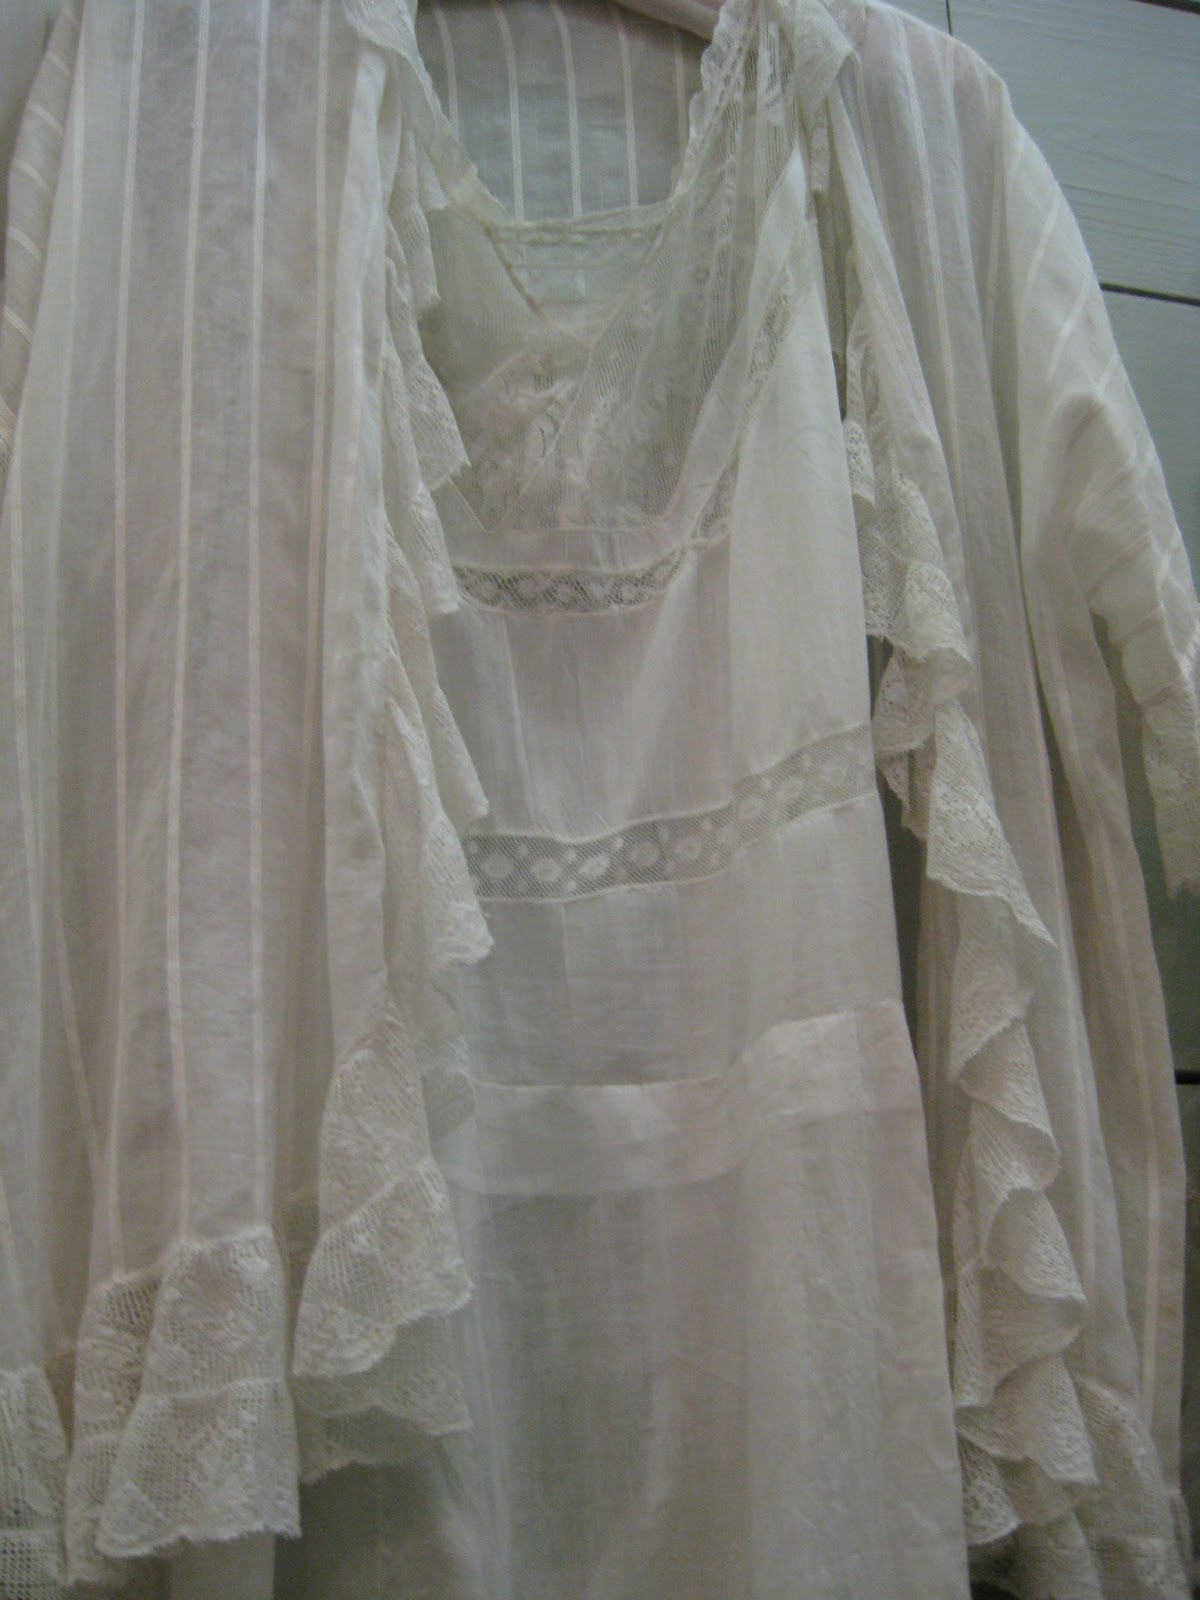 ANTIQUES IN OLD TOWN: Linen's and Lace....